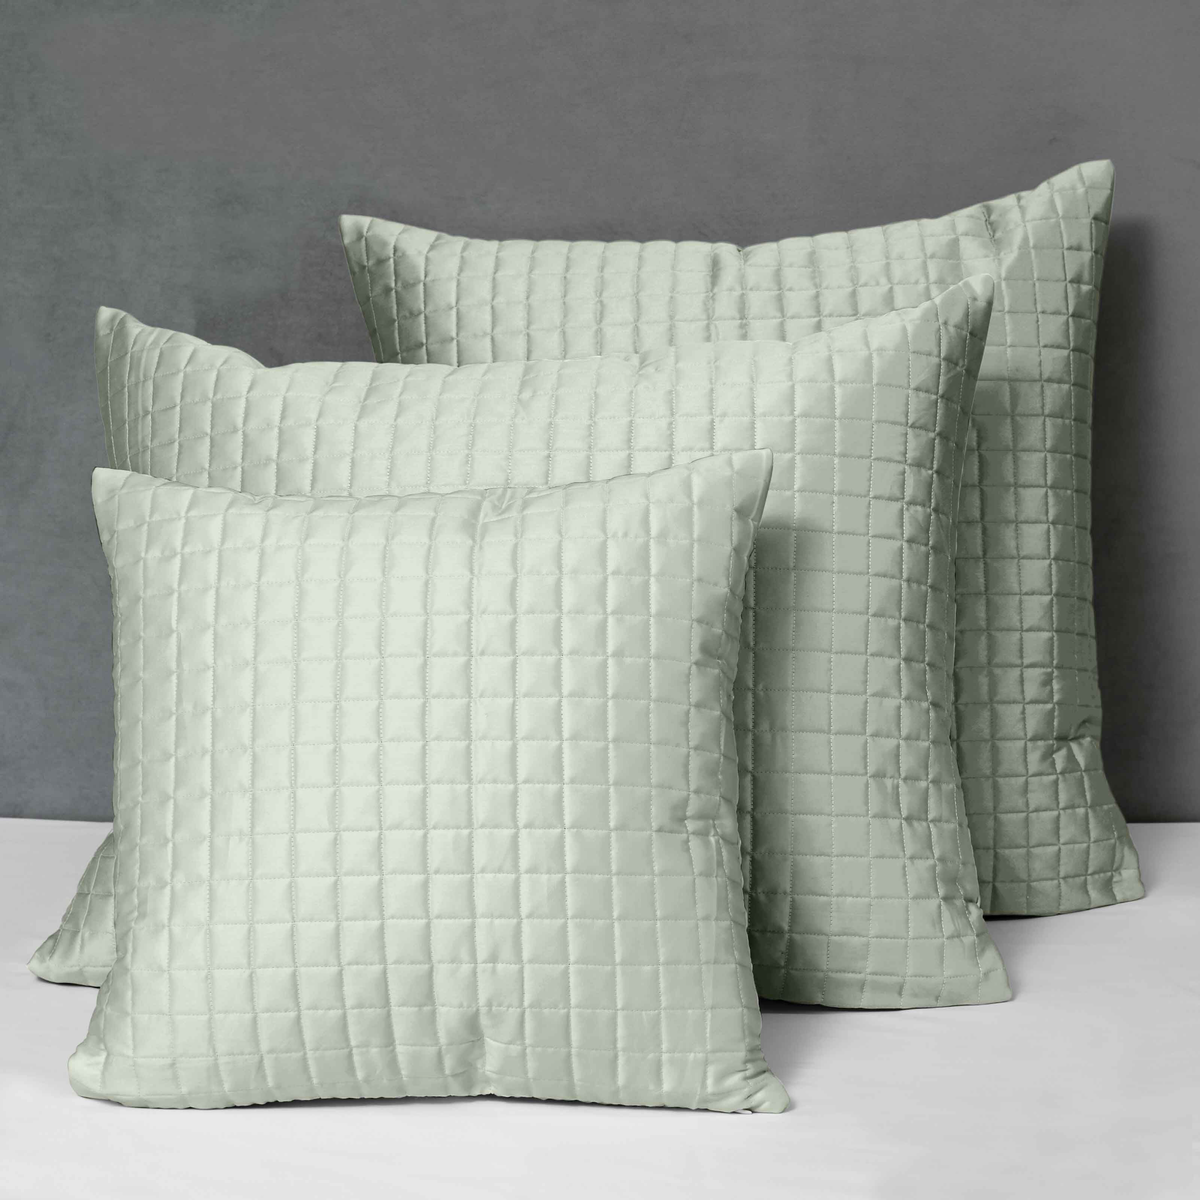 Different Sizes of Quilted Shams of Signoria Masaccio Bedding in Silver Sage Color